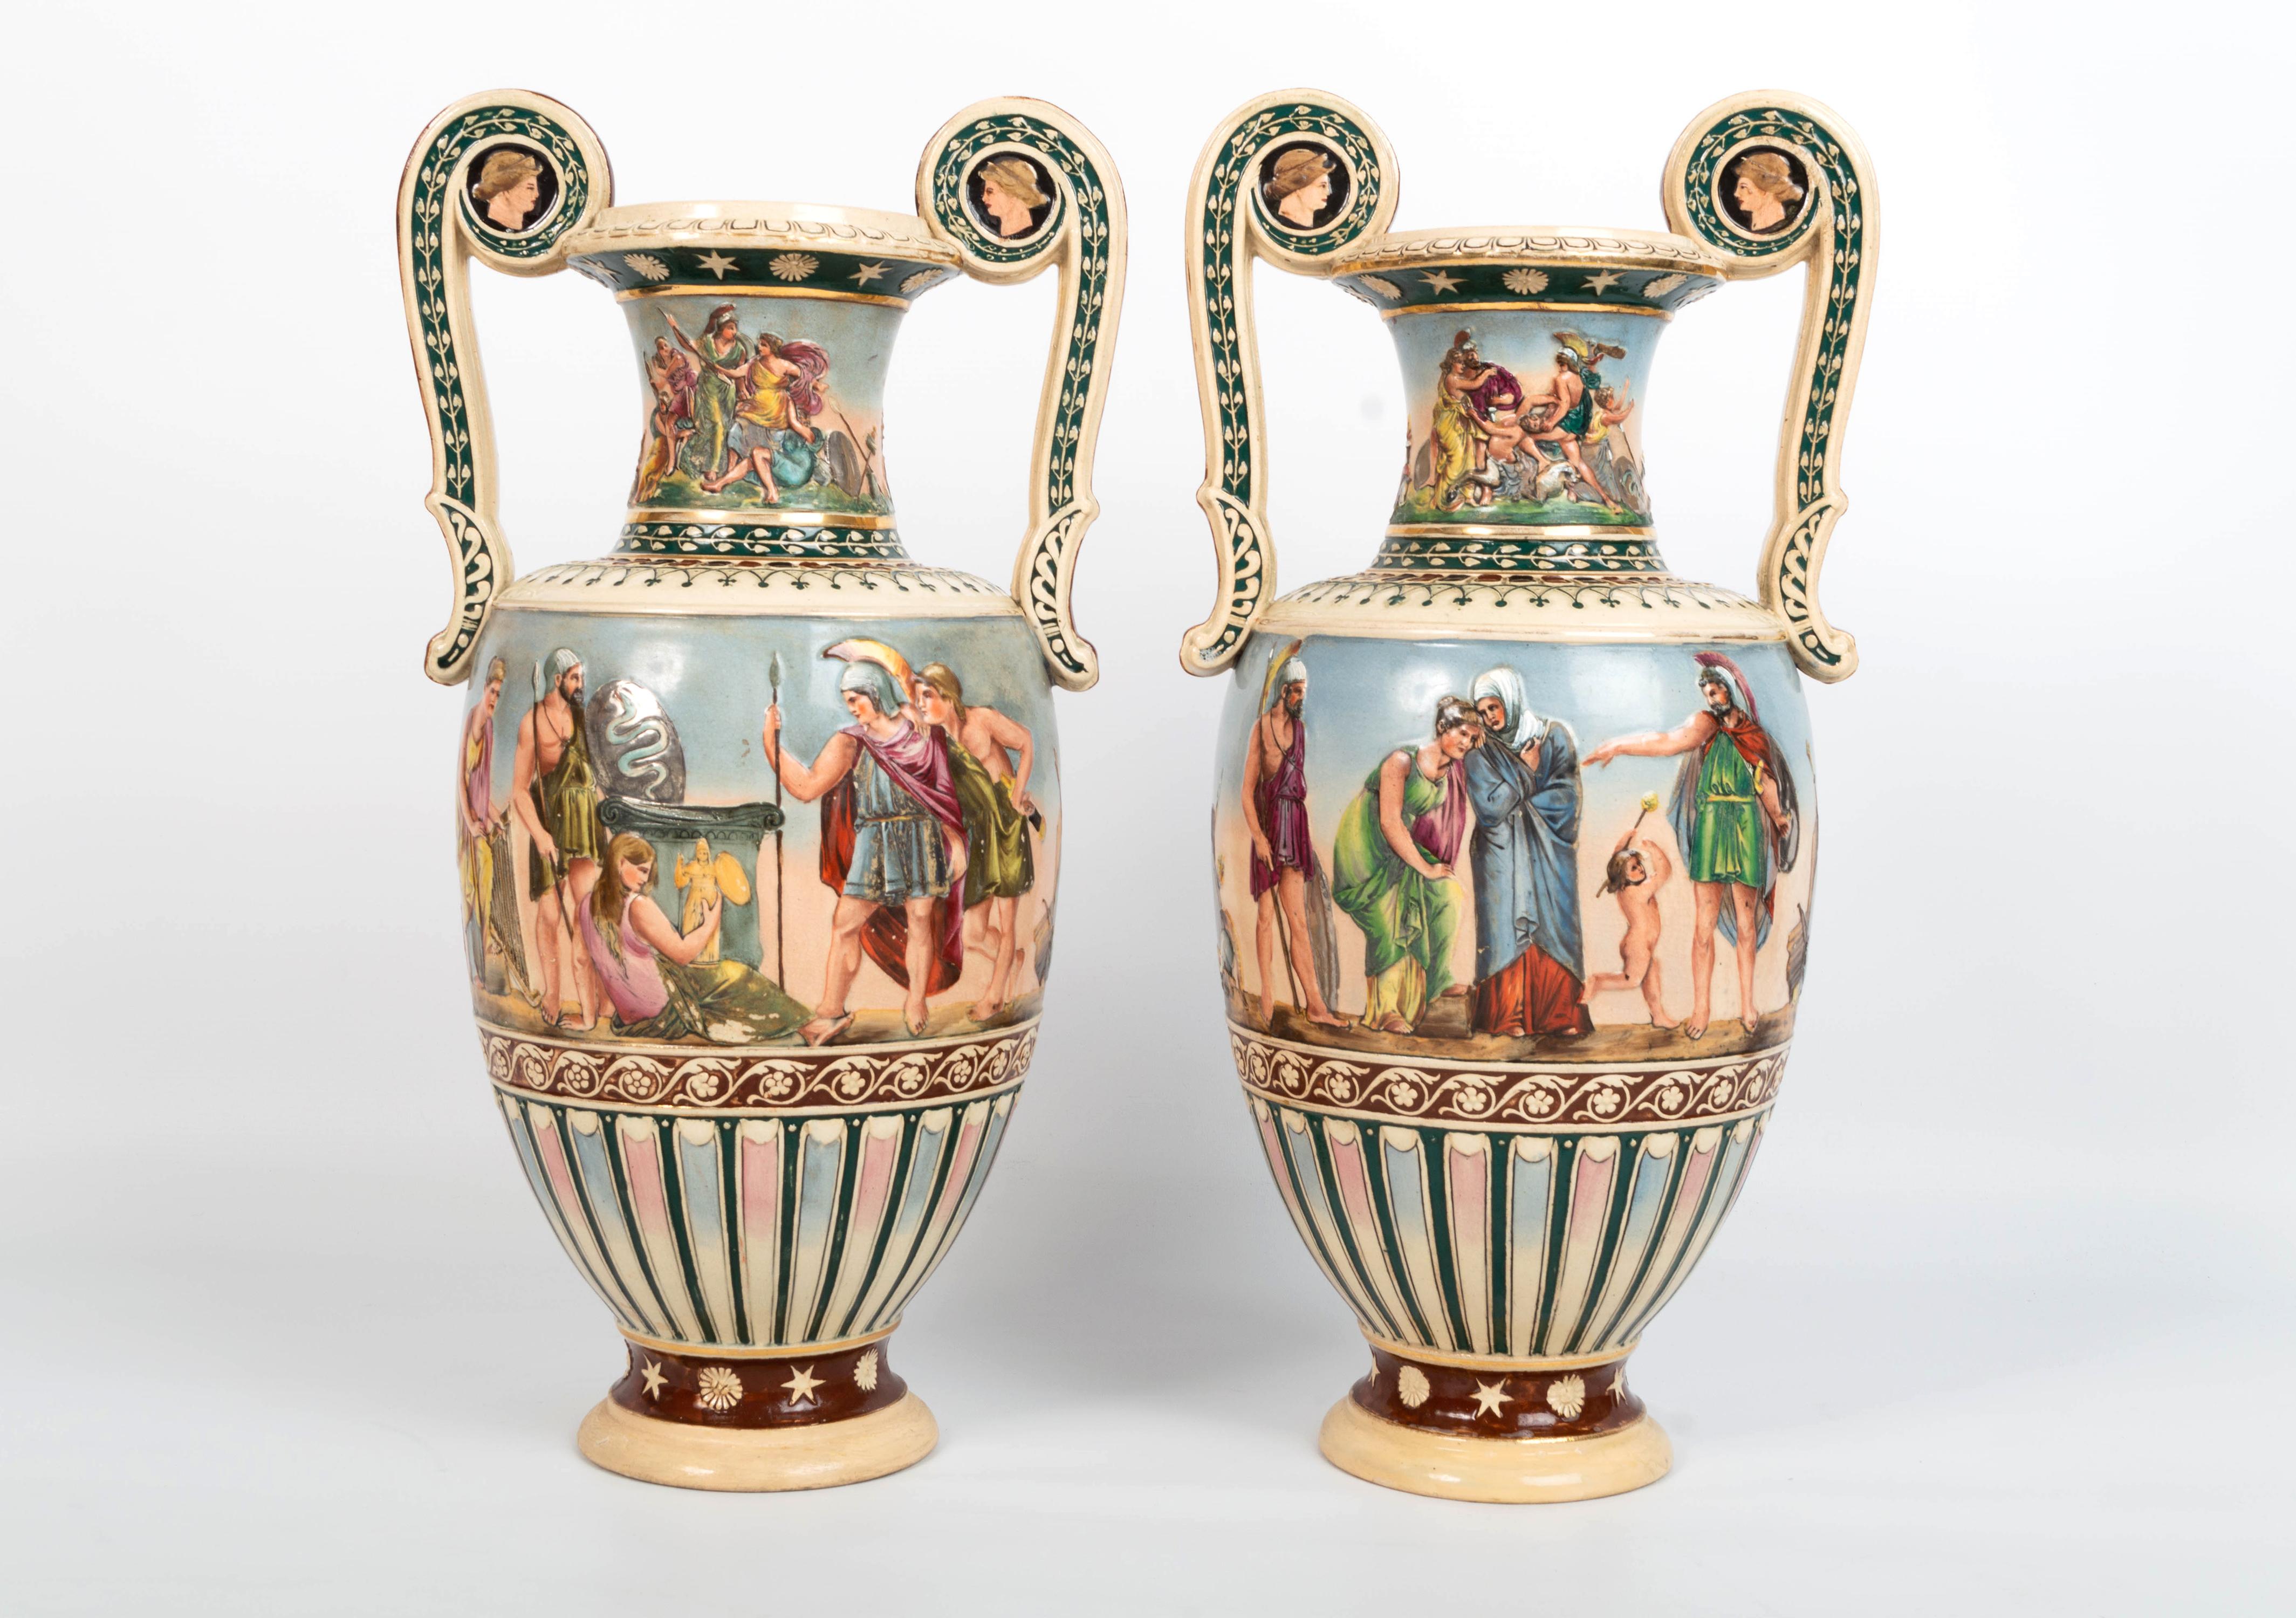 Pair of English 19th century Greek Revival vases
England, C.1830
Staffordshire pottery

A pair of pottery vases decorated in a Grecian style with figures in relief. 
Each Vase of baluster outline with twin scroll handles, ending on a circular